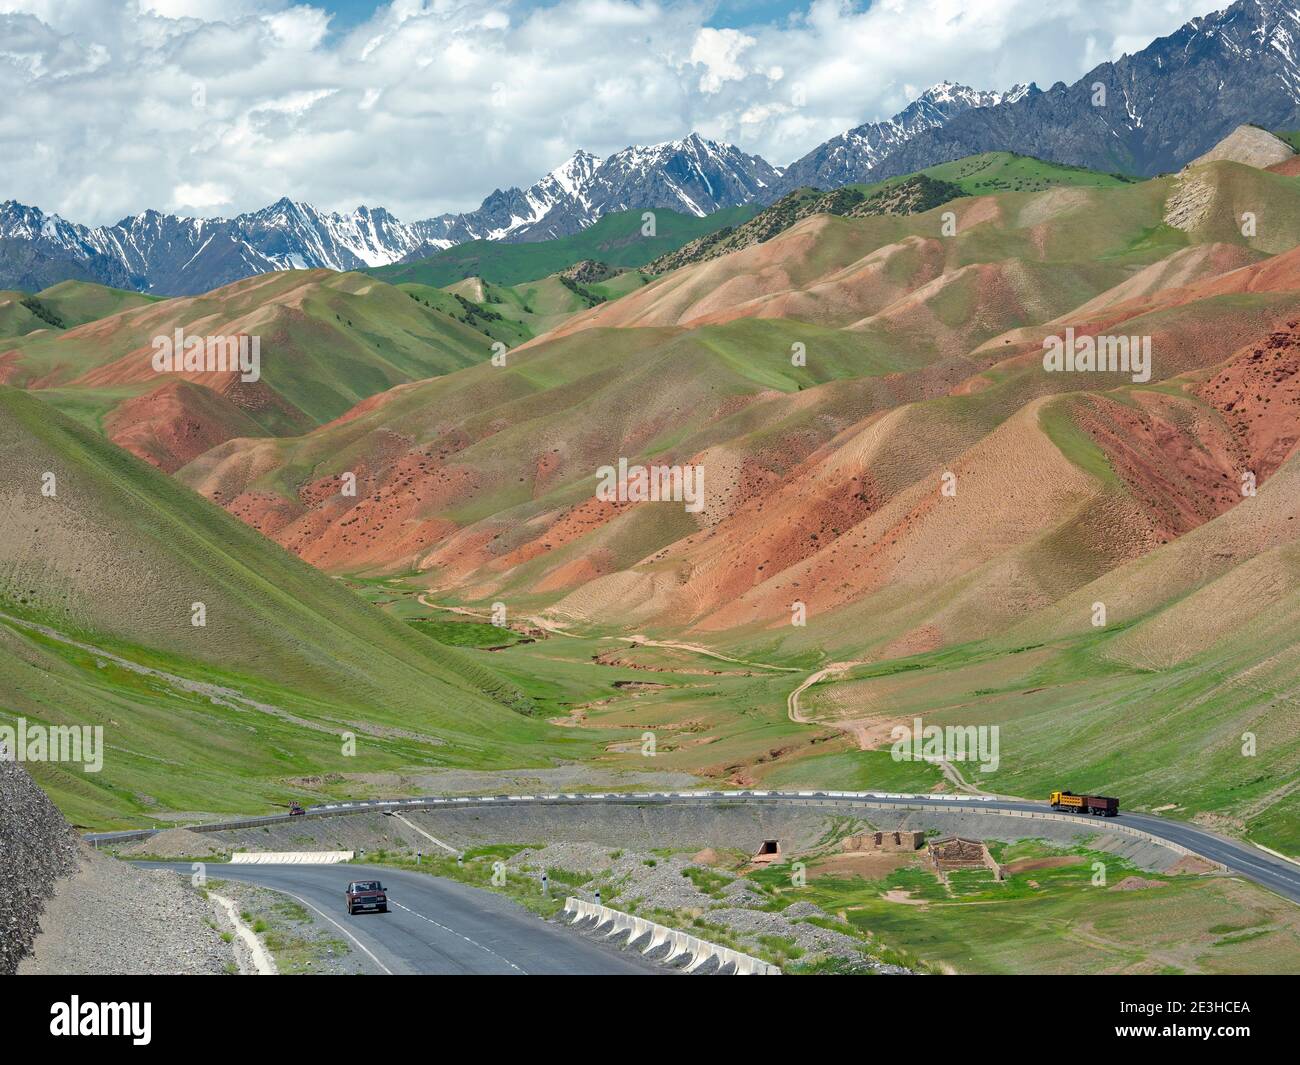 Landscape along the  Pamir Highway. The mountain range Tian Shan or Heavenly Mountains. Asia, Central Asia, Kyrgyzstan Stock Photo